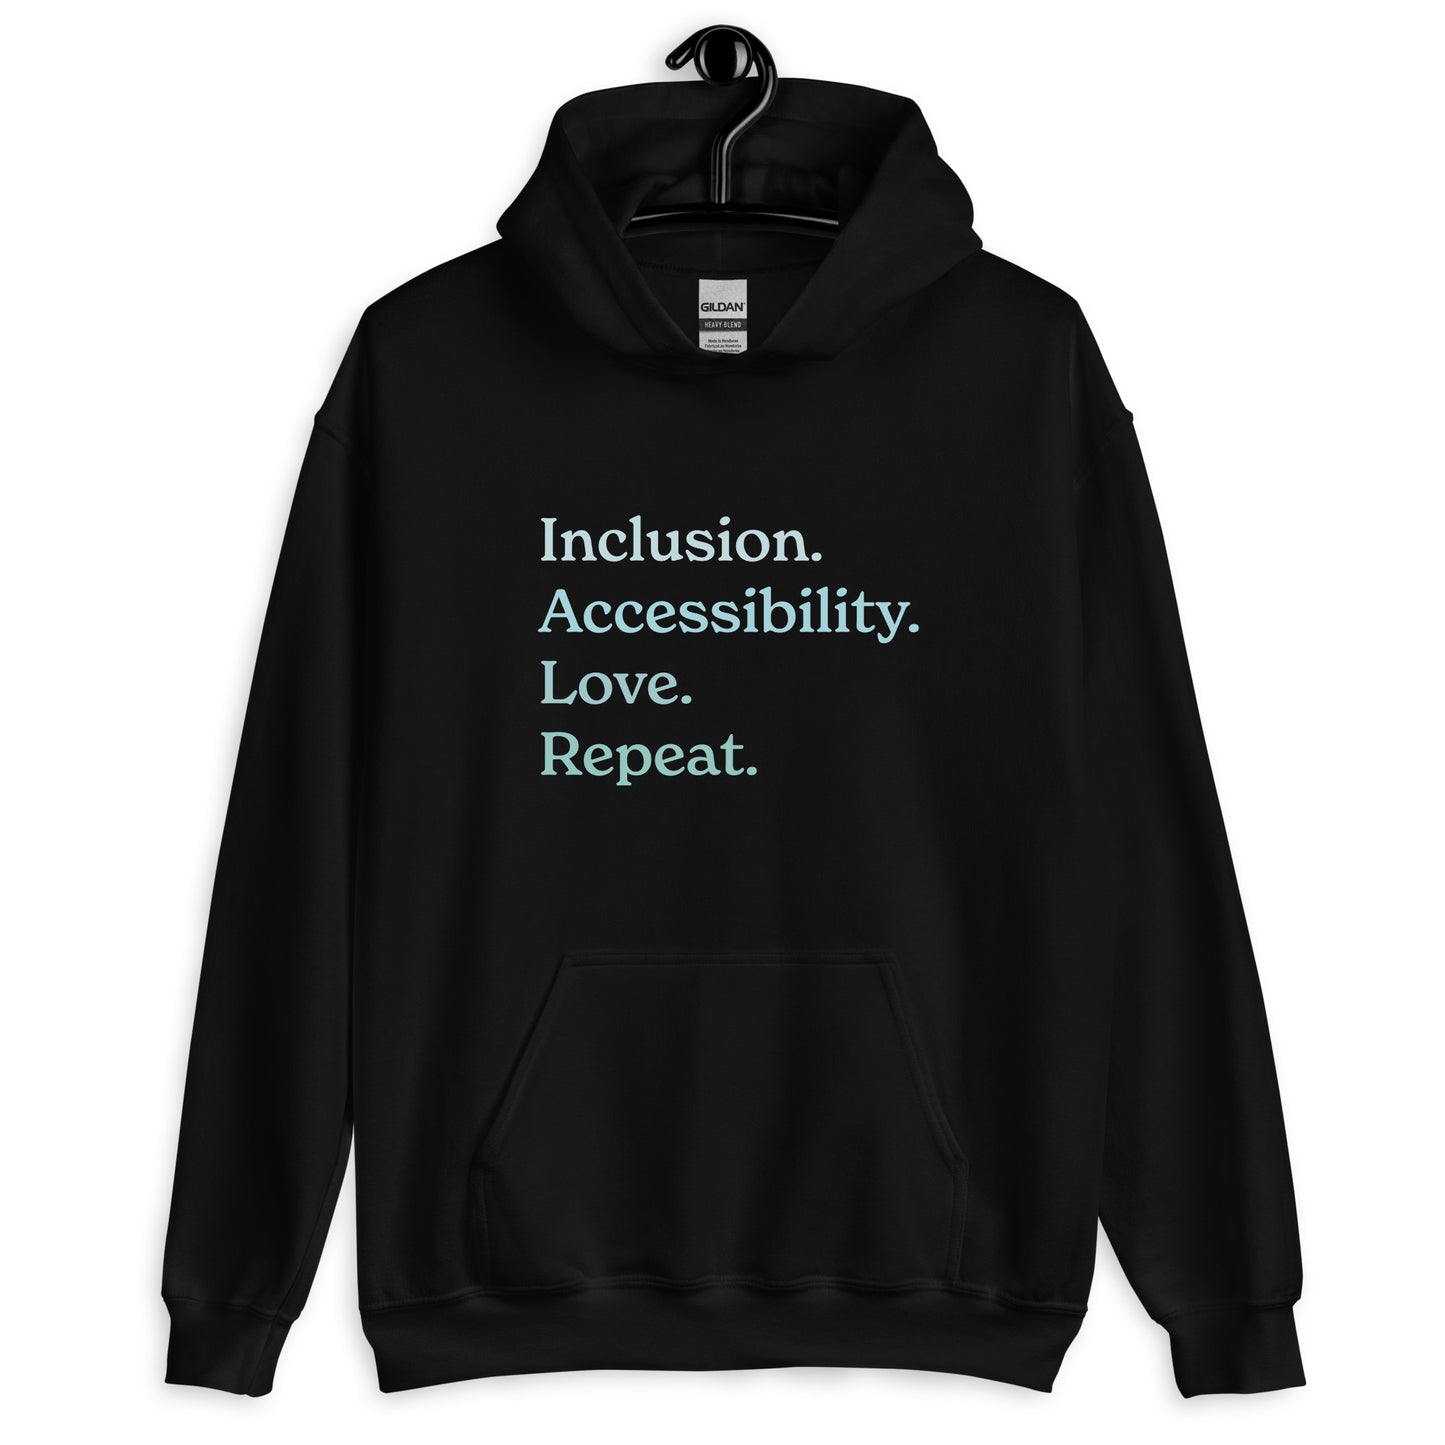 Inclusion. Accessibility. Love. Repeat. — Adult Unisex Hoodie